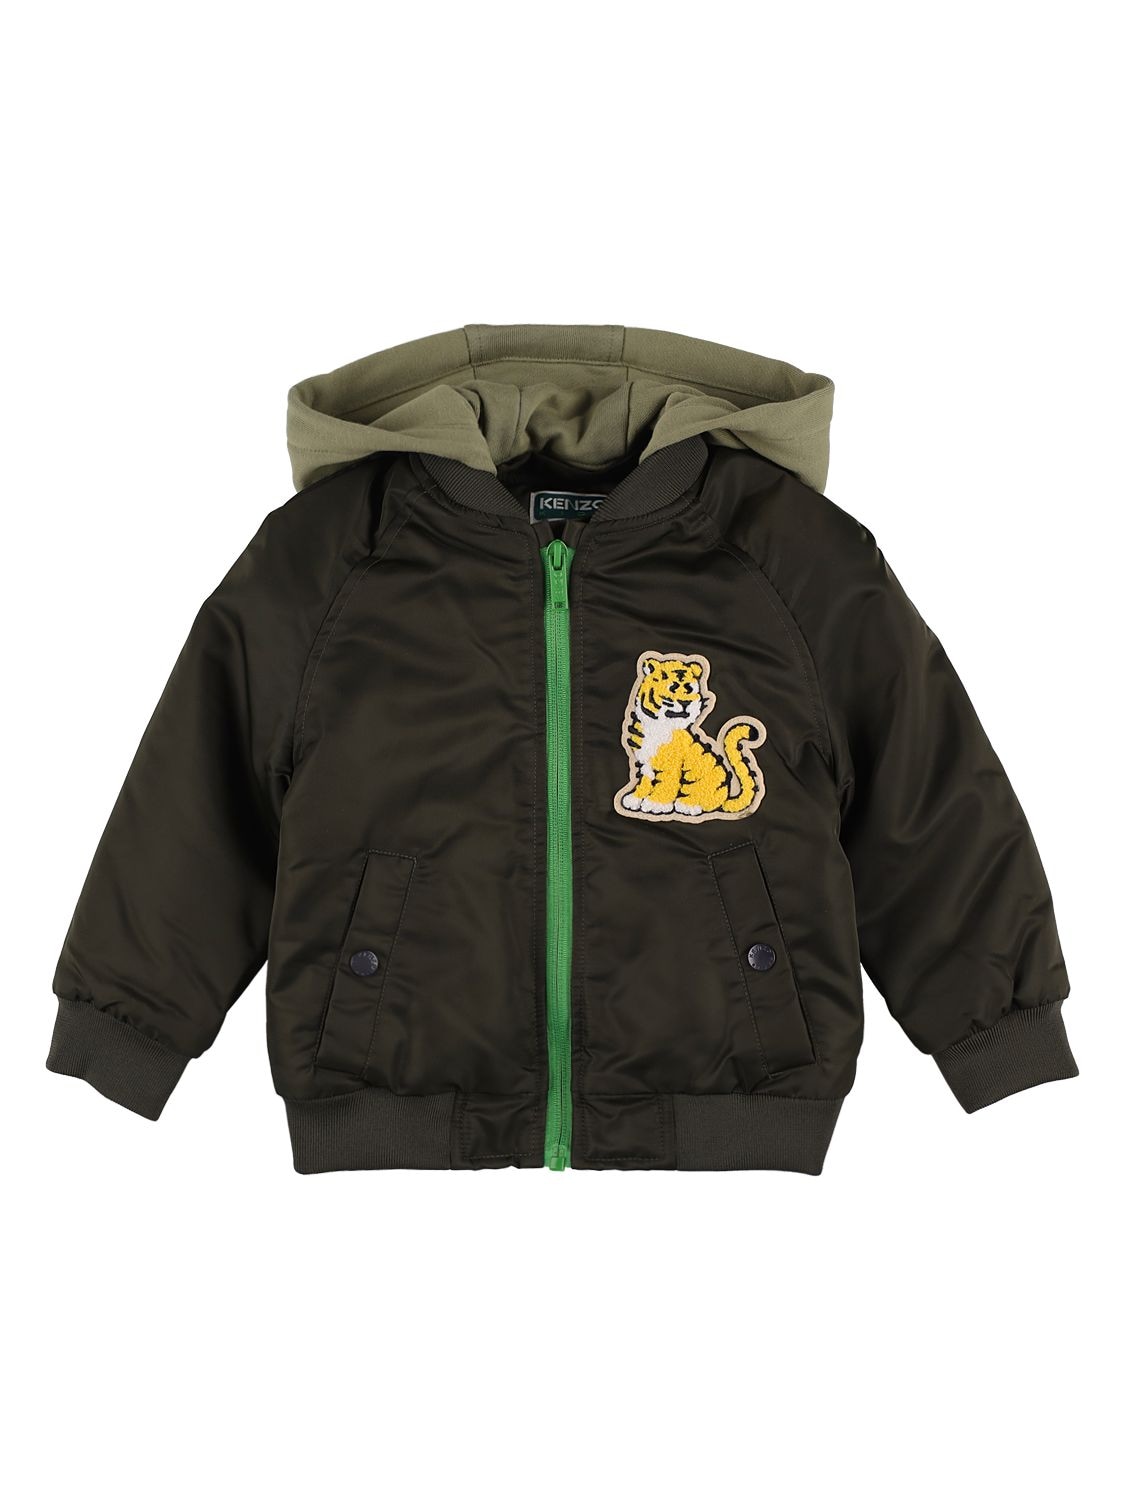 Kenzo Kids' Logo Embroidered Nylon Jacket W/ Patch In Forest Green